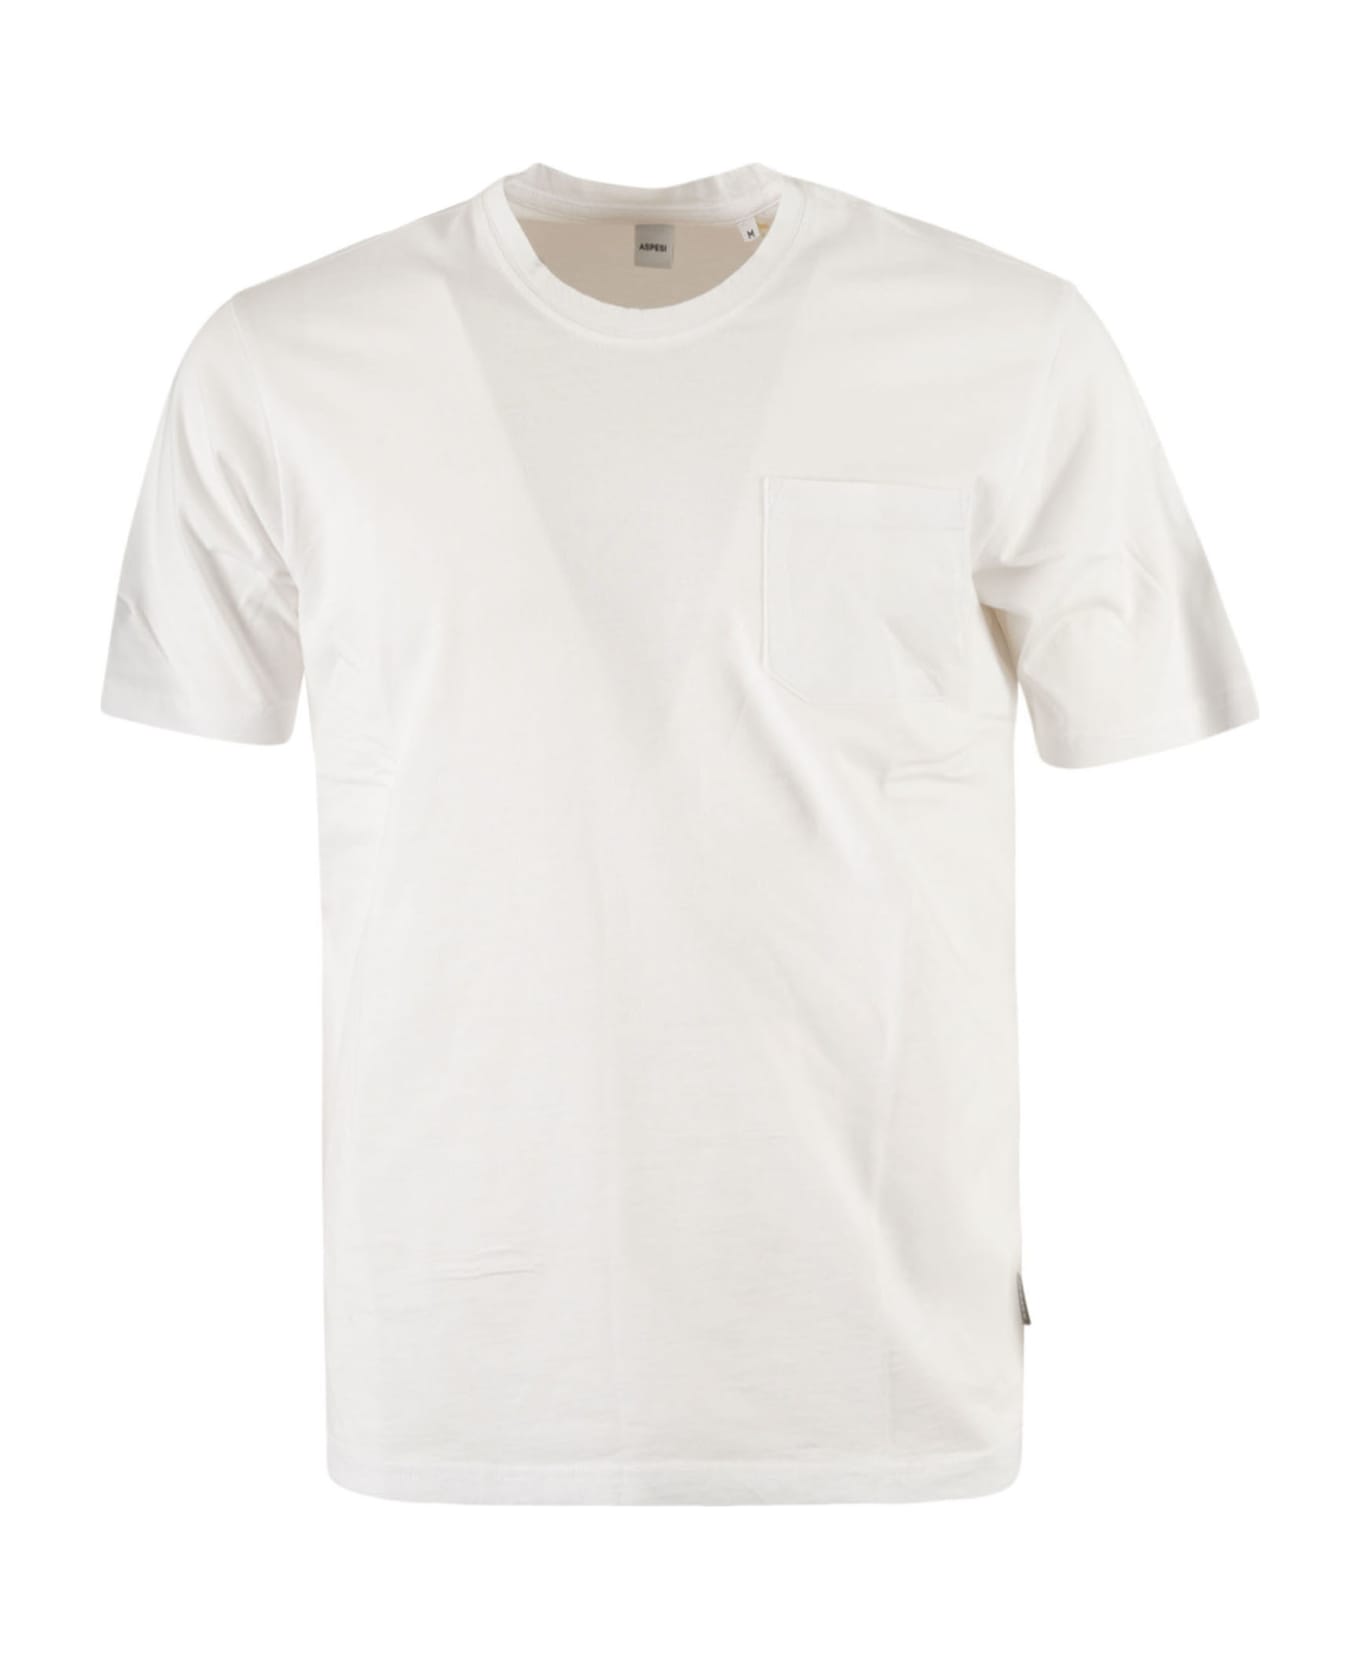 Aspesi Regular Fit Patched Pocket T-shirt - White シャツ